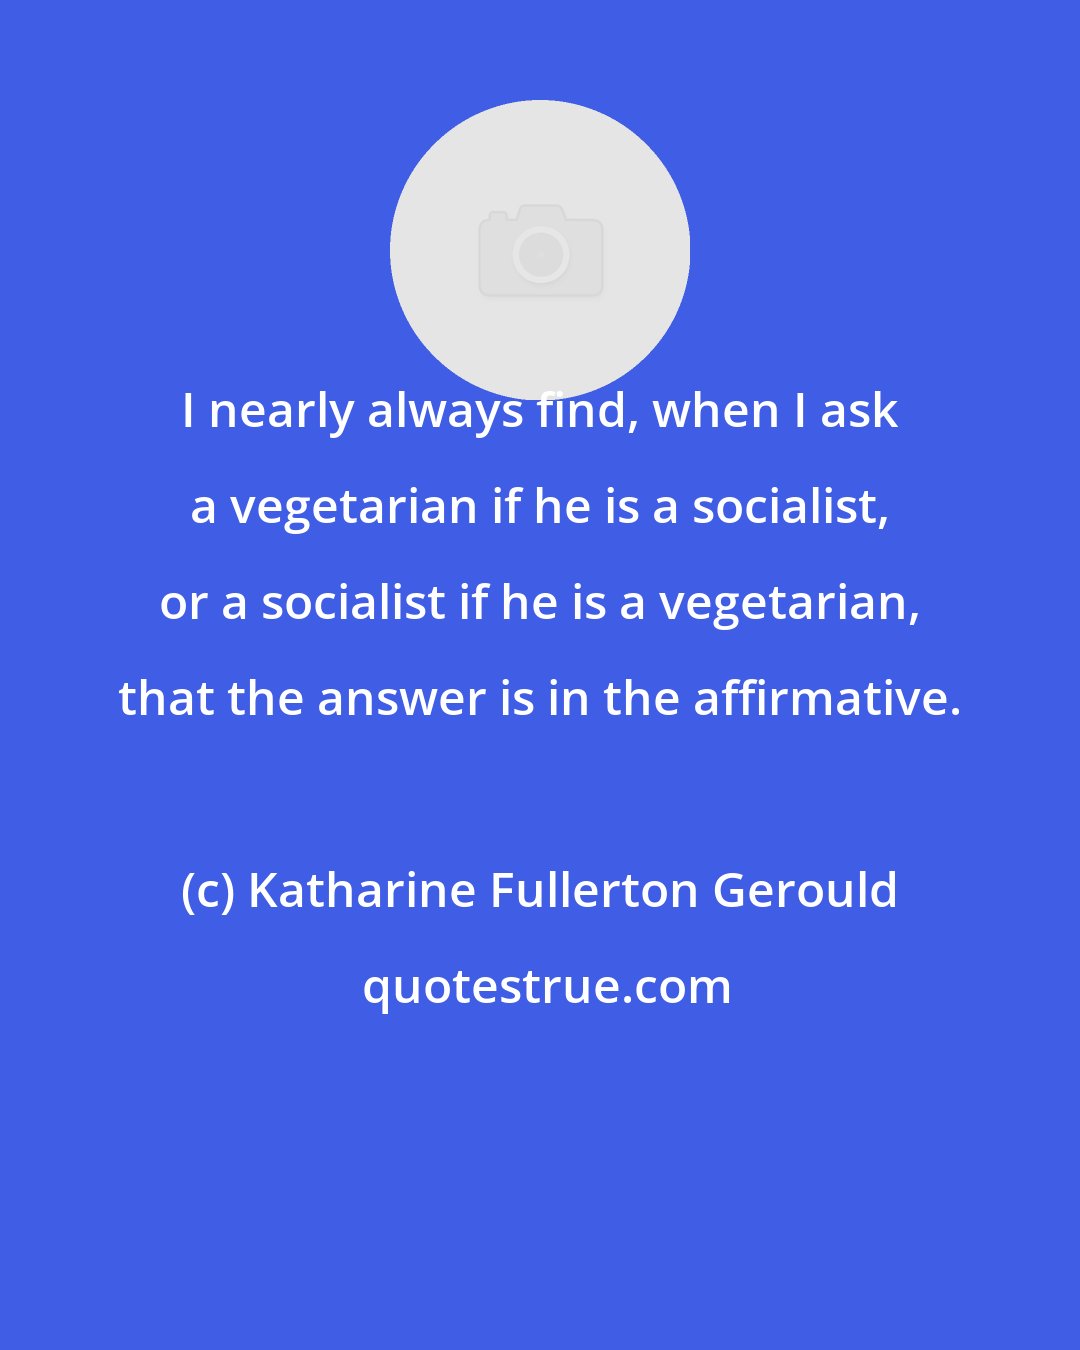 Katharine Fullerton Gerould: I nearly always find, when I ask a vegetarian if he is a socialist, or a socialist if he is a vegetarian, that the answer is in the affirmative.